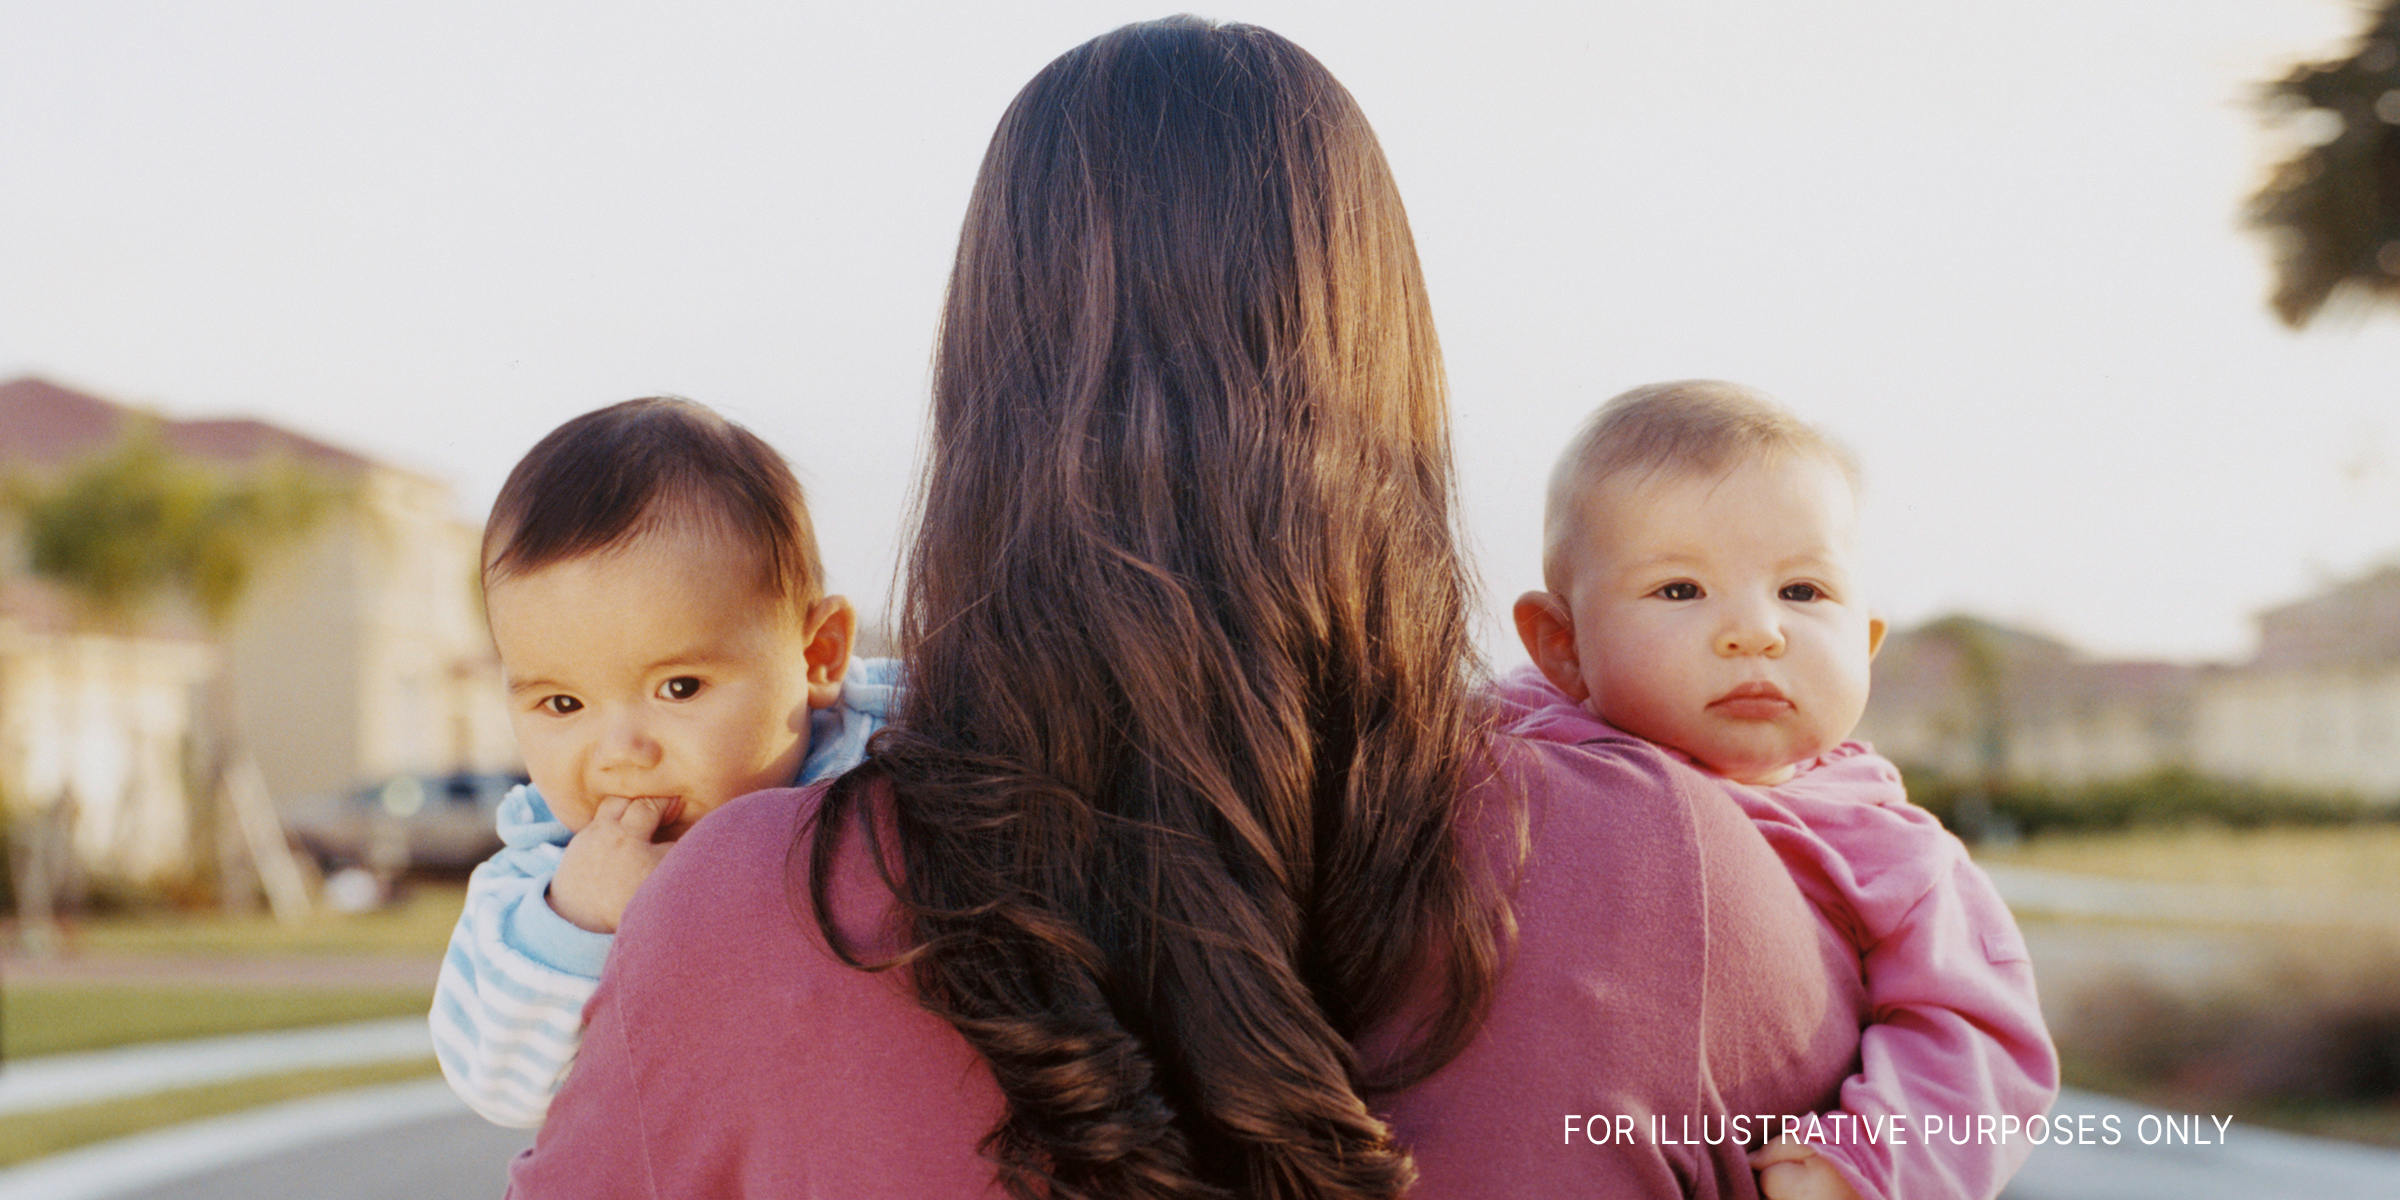 A woman carrying a set of twins | Source: Getty Images